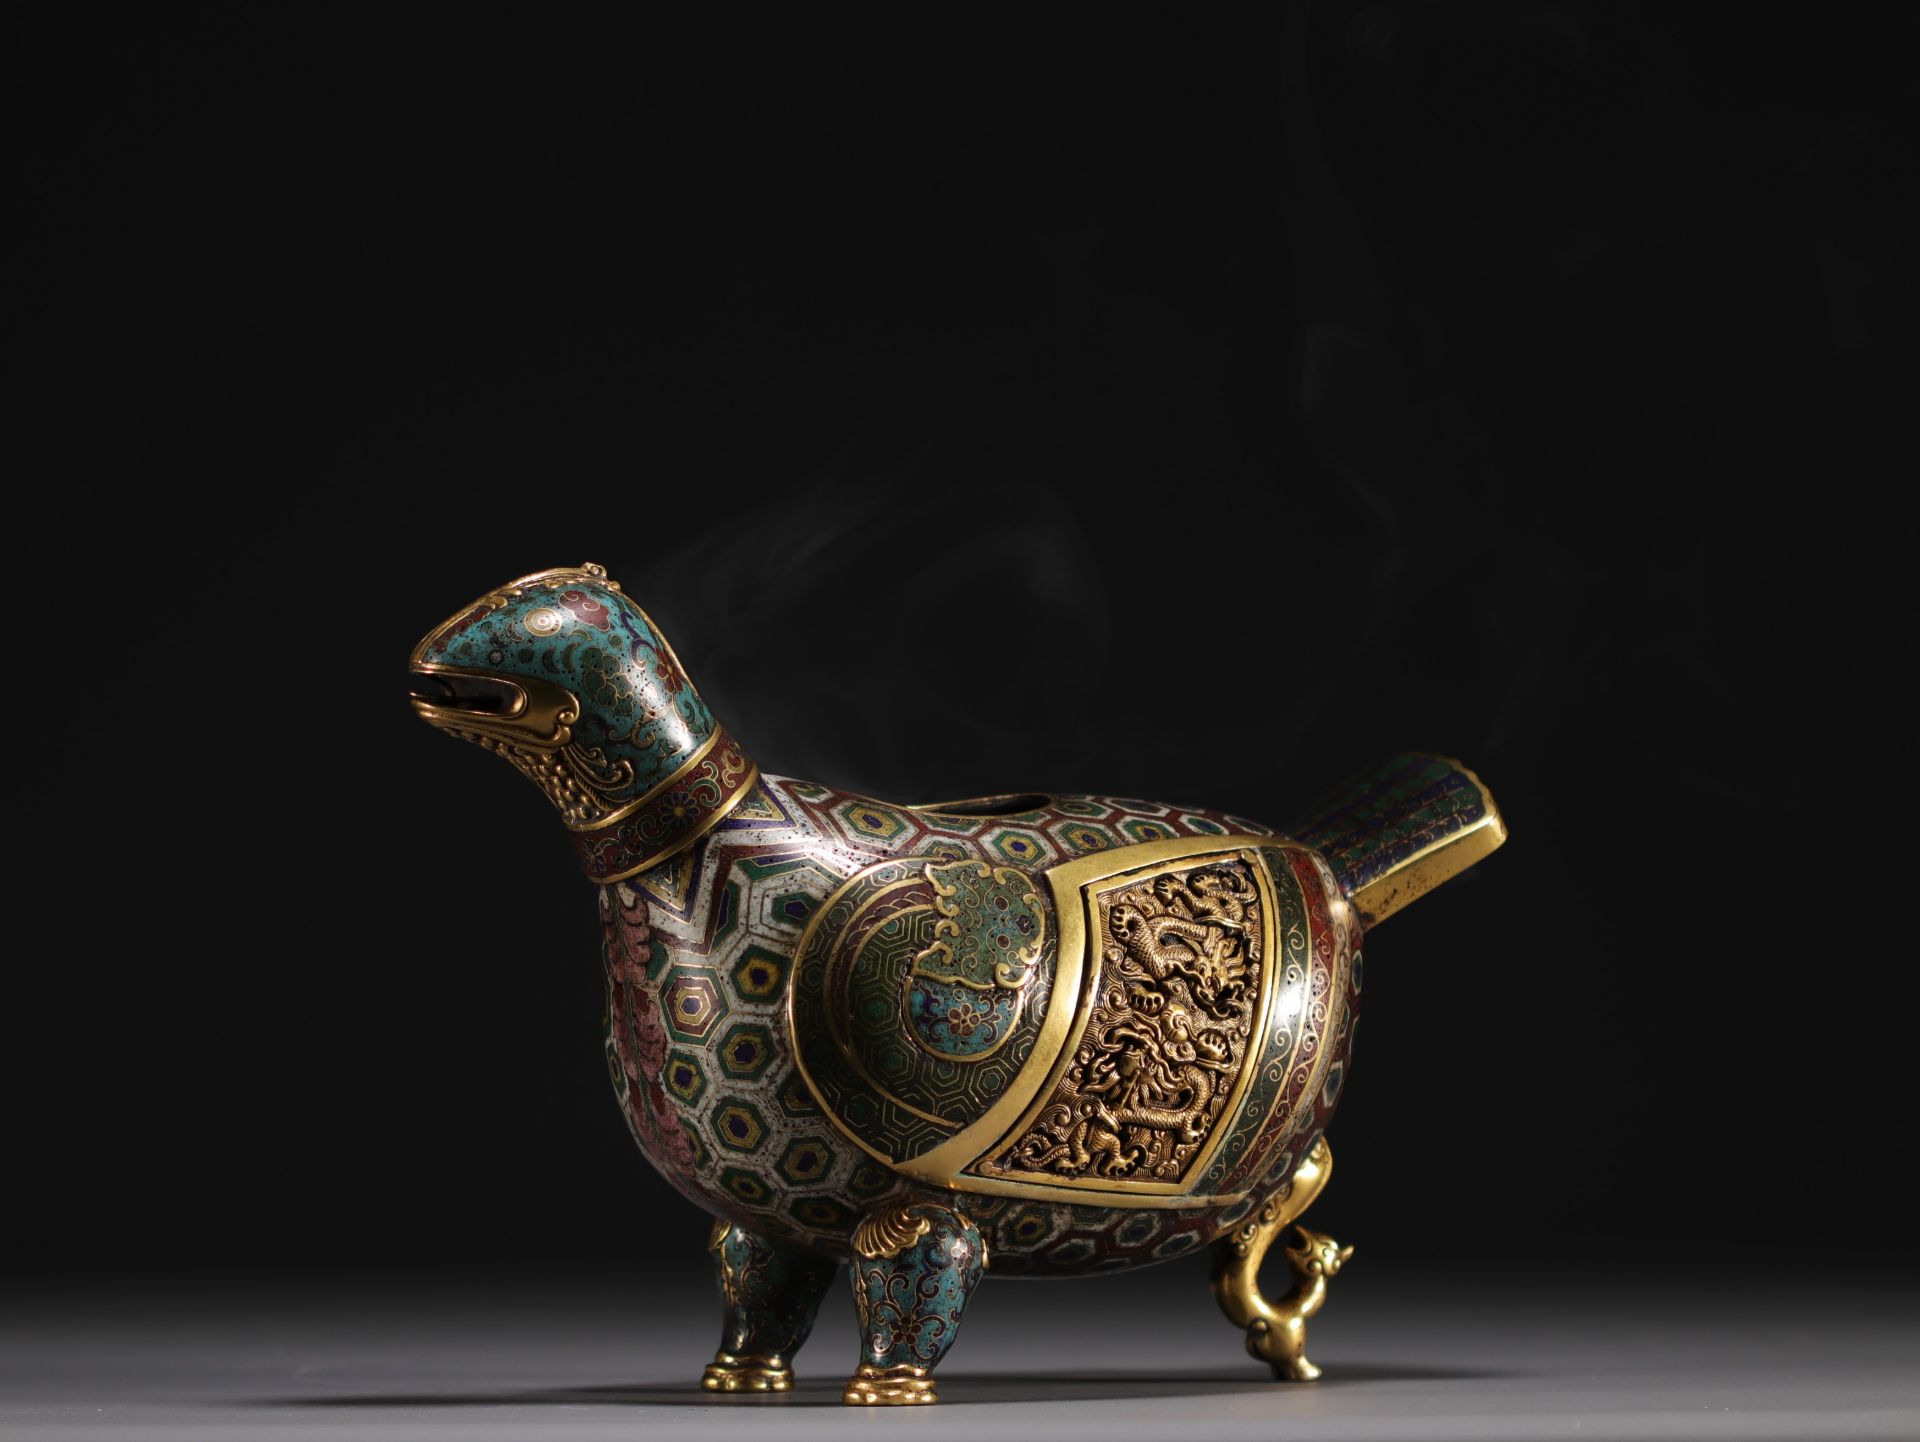 China - Bird-shaped cloisonne bronze perfume burner decorated with dragons, 18th century. - Image 7 of 7